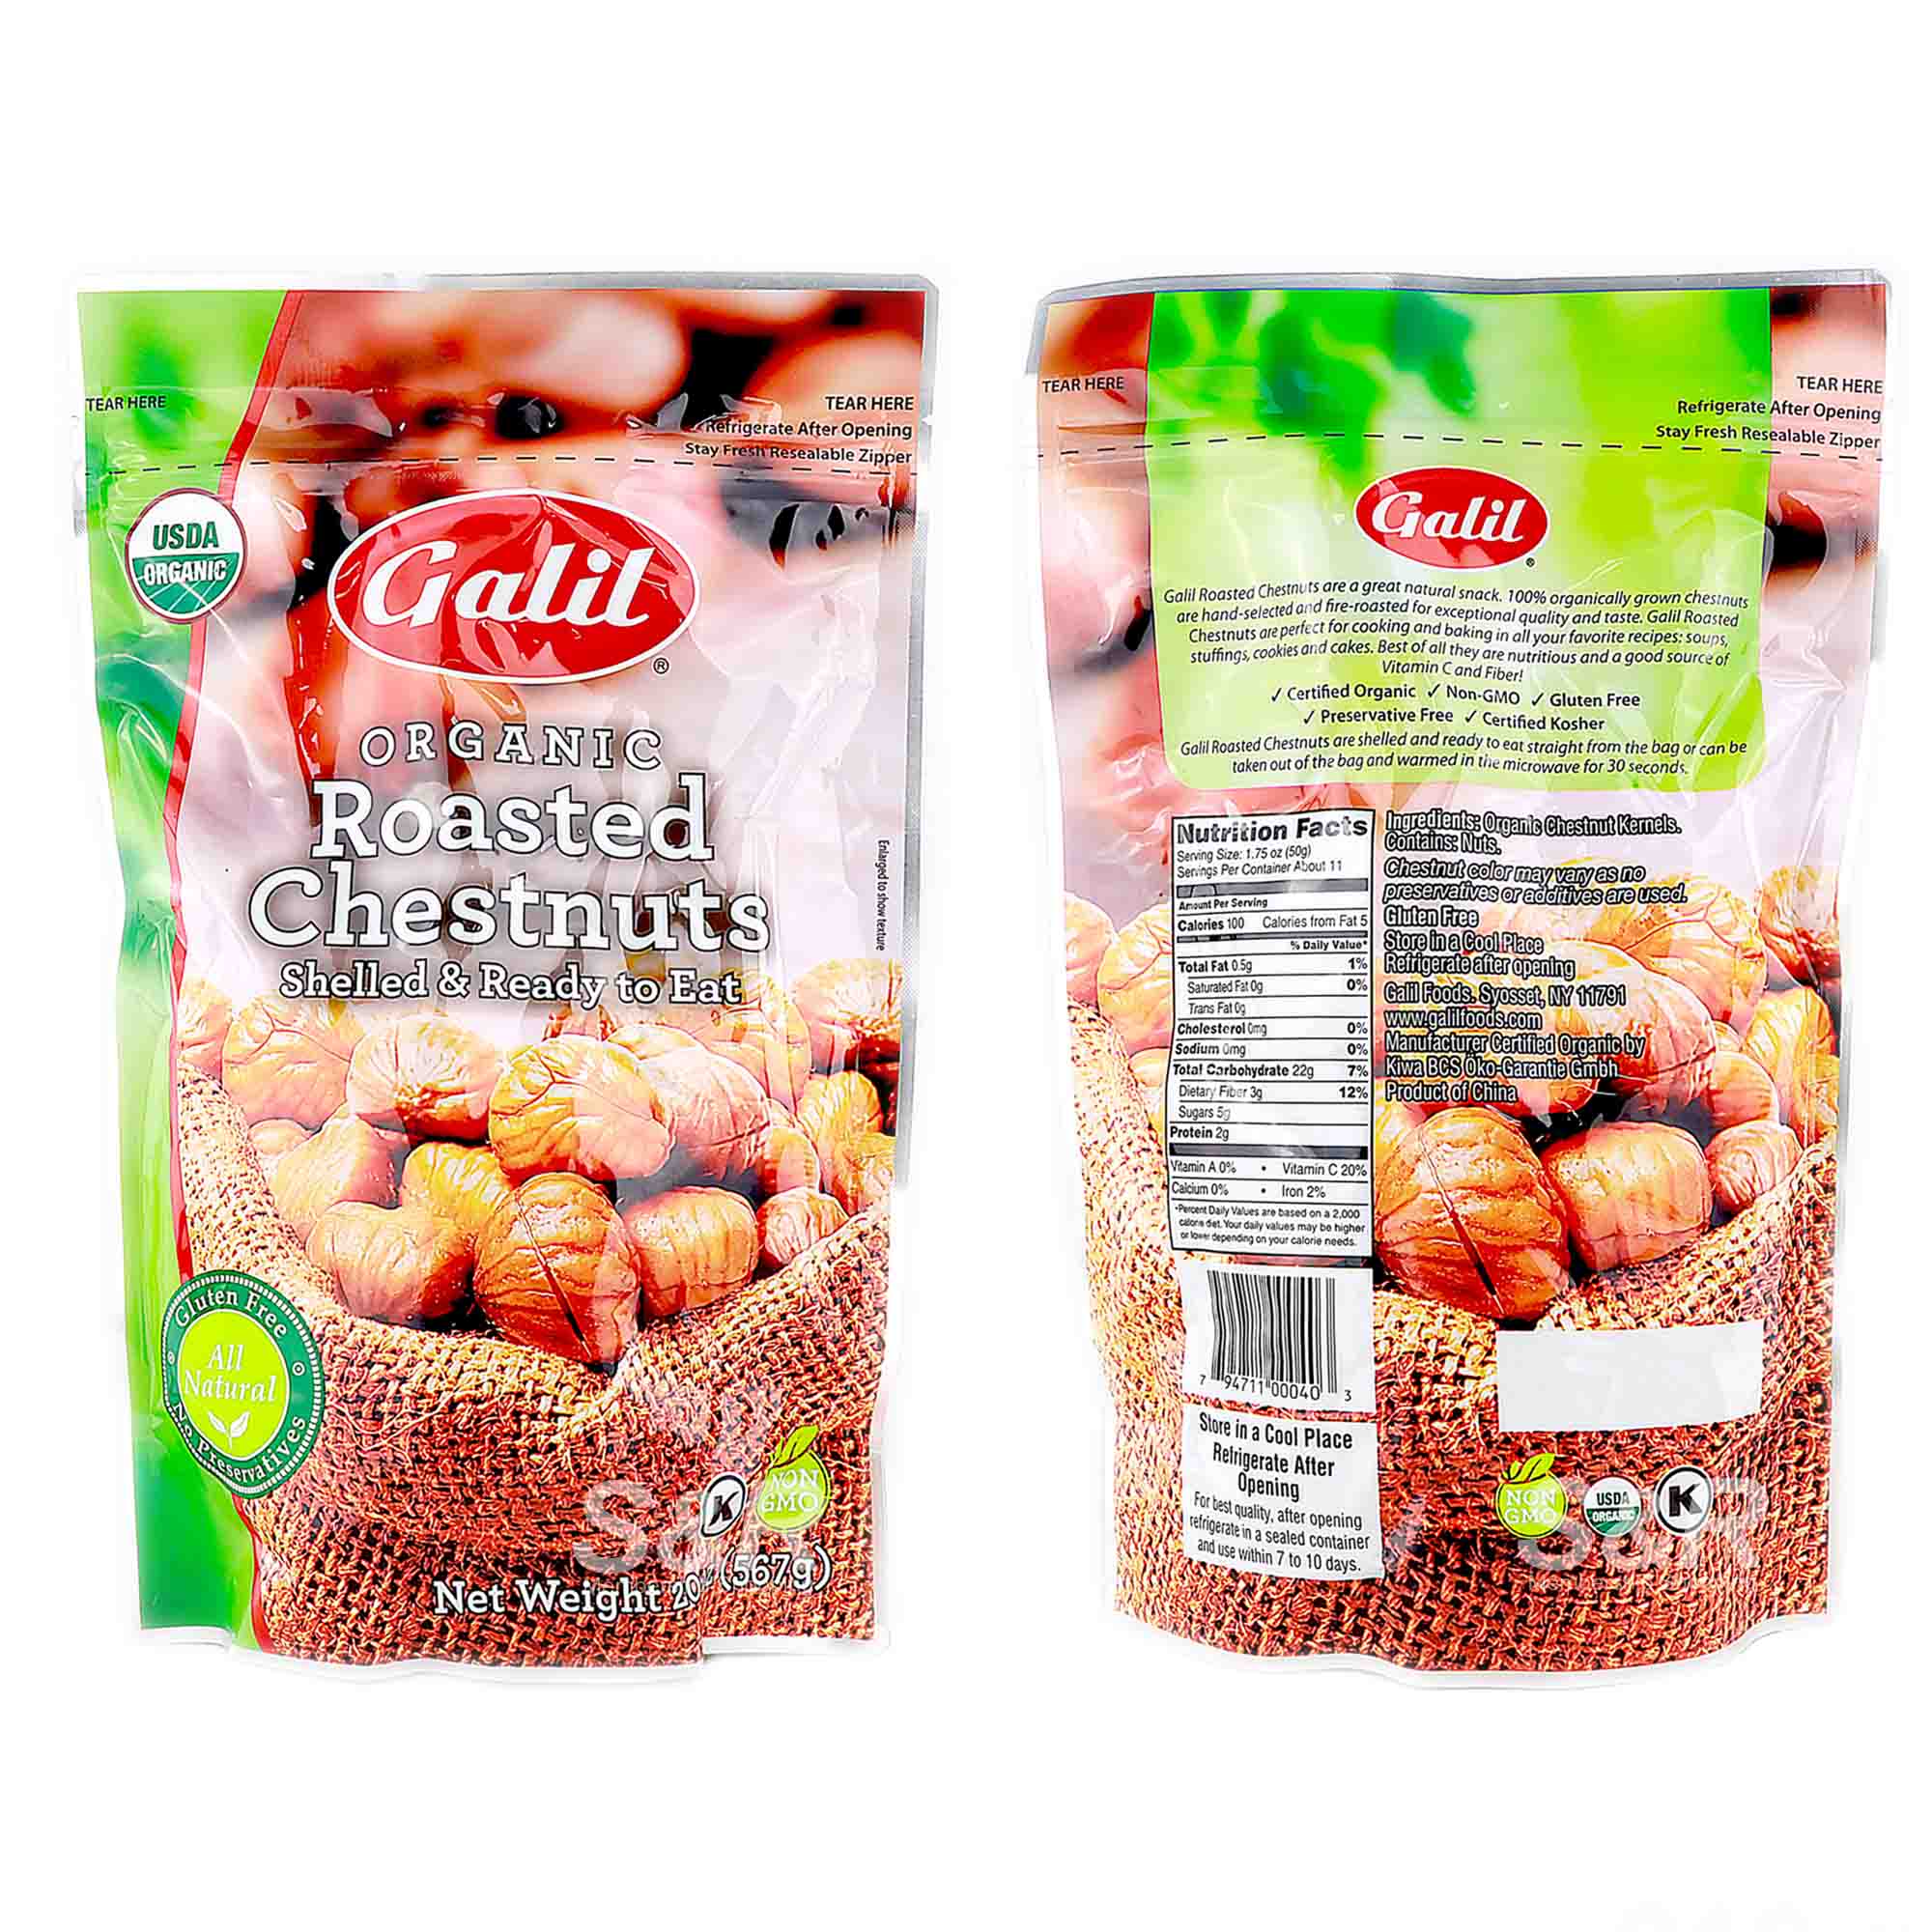 Organic Roasted Chestnuts Shelled